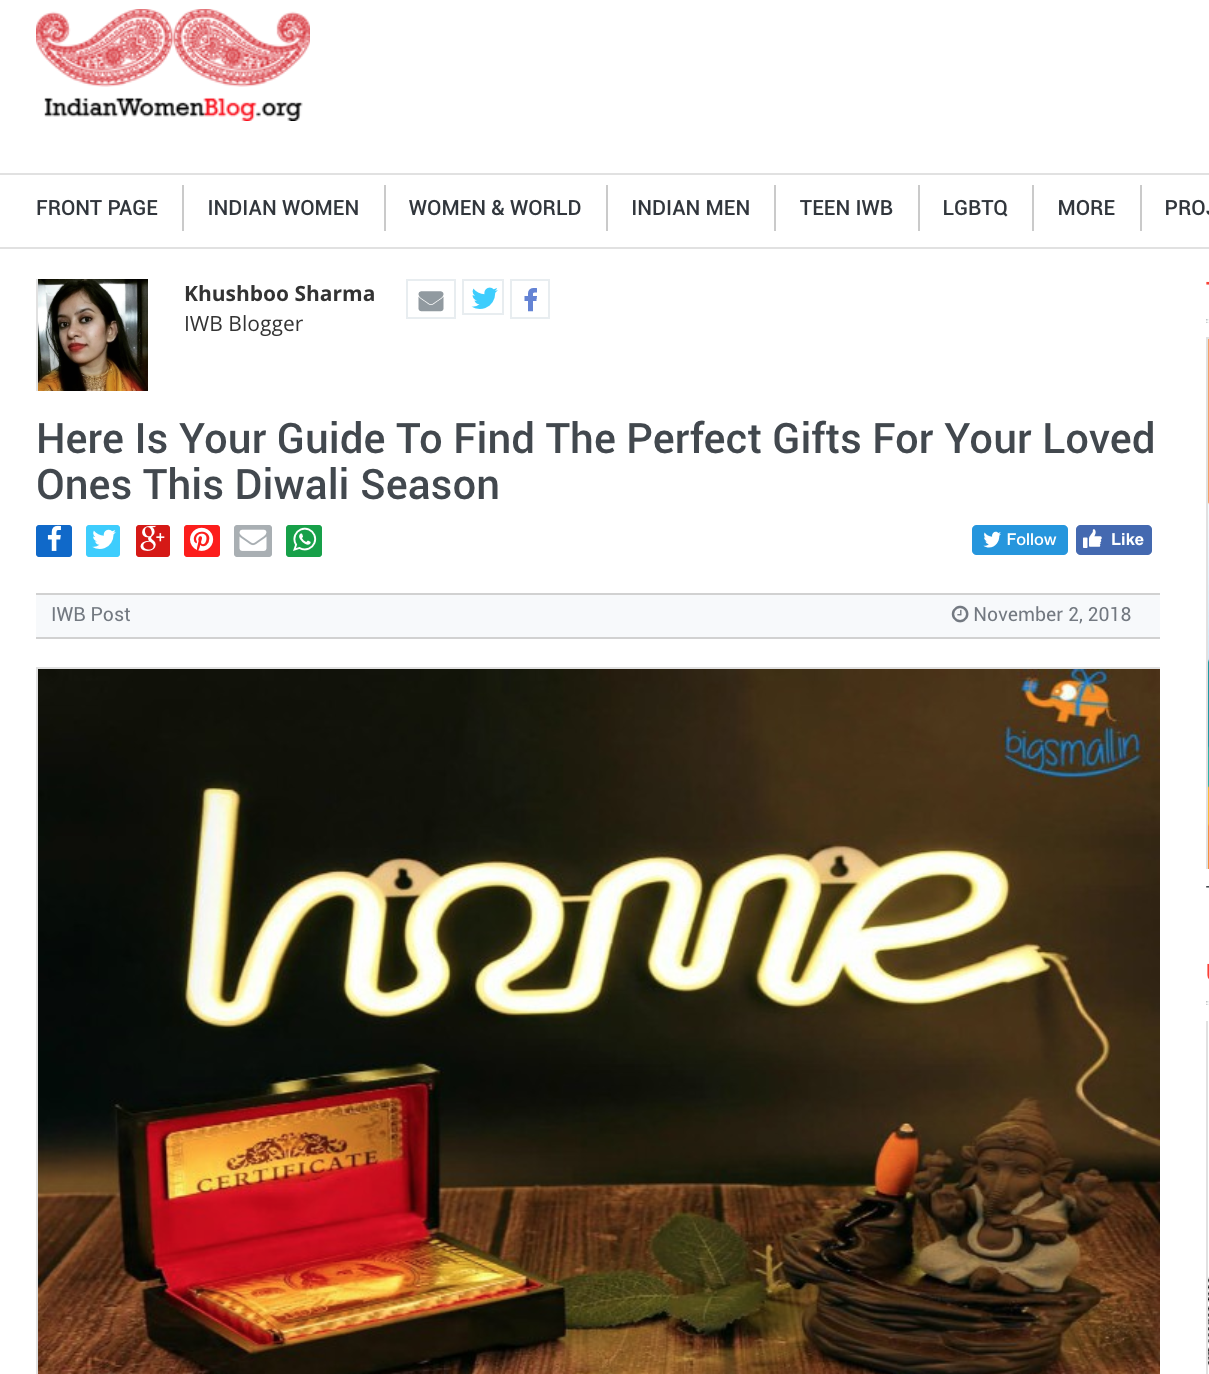 Indian Women Blog | Here Is Your Guide To Find The Perfect Gifts For Your Loved Ones This Diwali Season